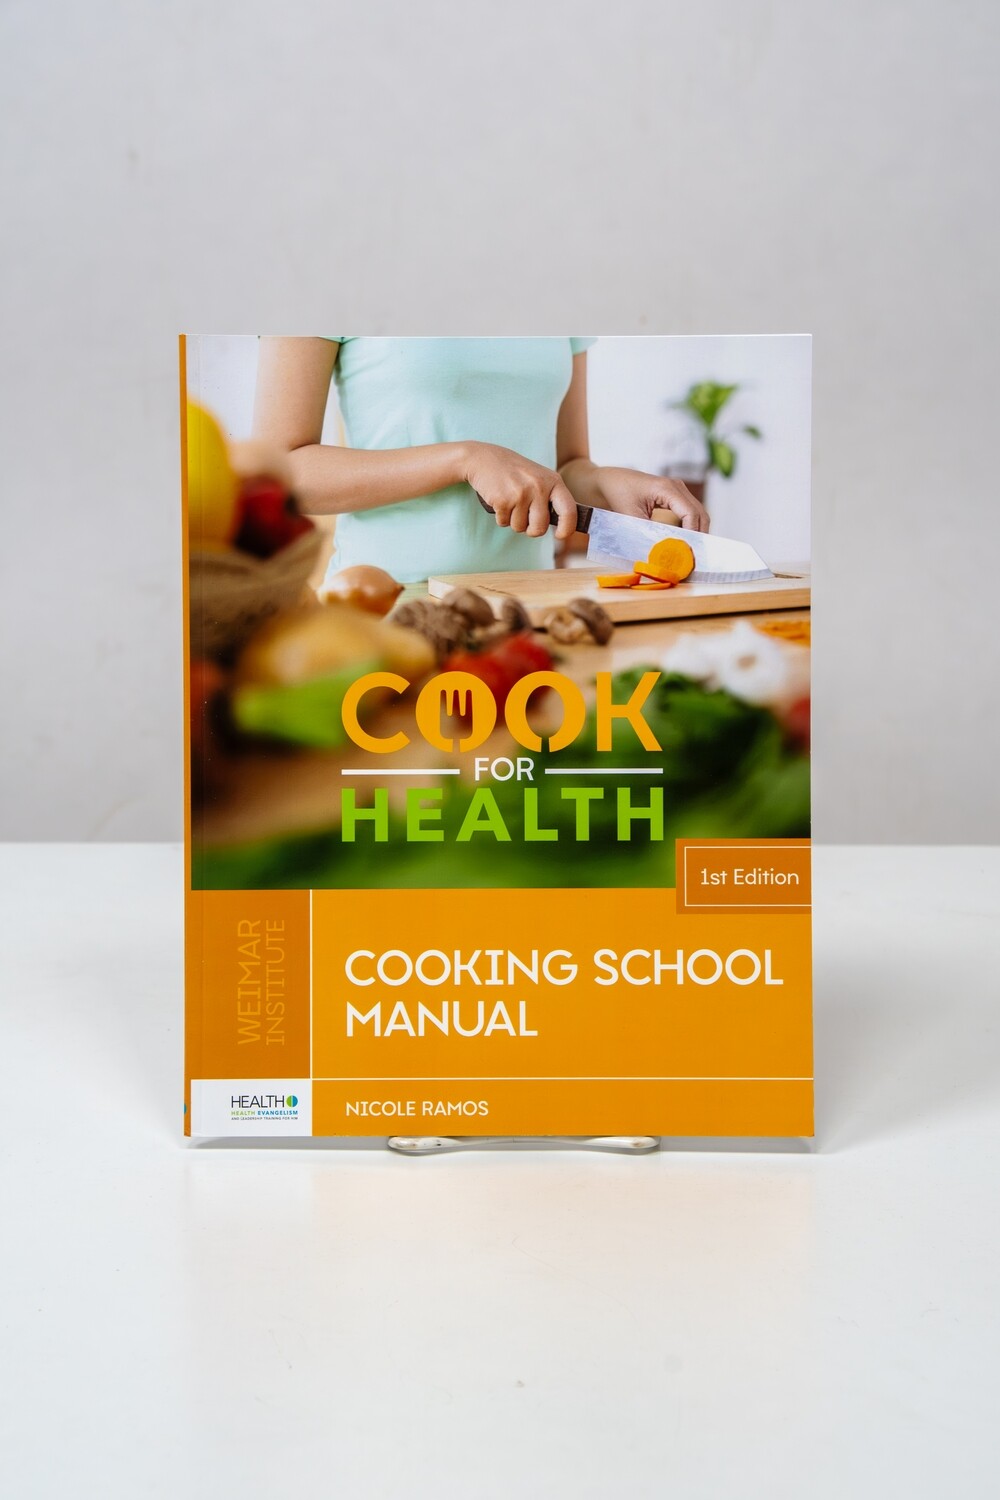 Student Health Package (All 7 Books Plus a Free Item)